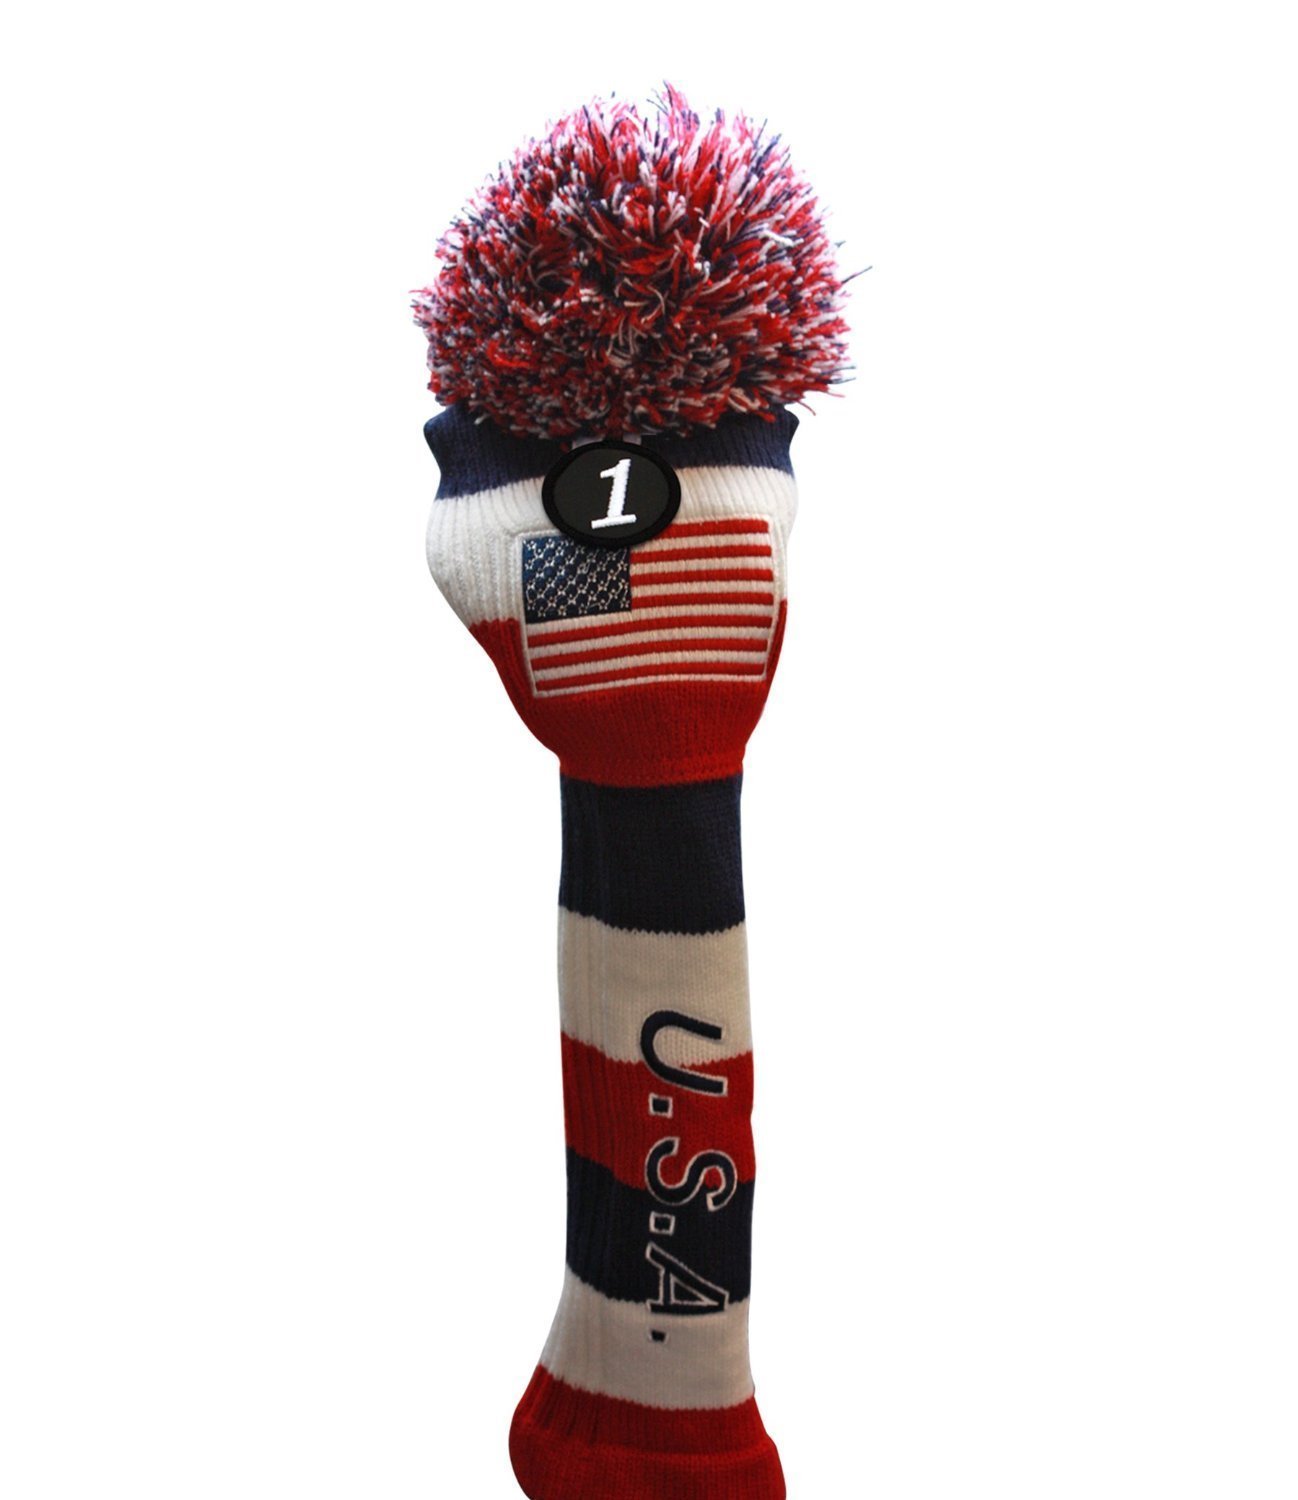 USA Majek Golf Driver 1 3 5 X Fairway Woods Headcovers Pom Pom Knit Limited Edition Vintage Classic Traditional Flag Stars Red White Blue Stripes Retro Head Cover Fits 460cc Drivers and 260cc Woods - image 2 of 8